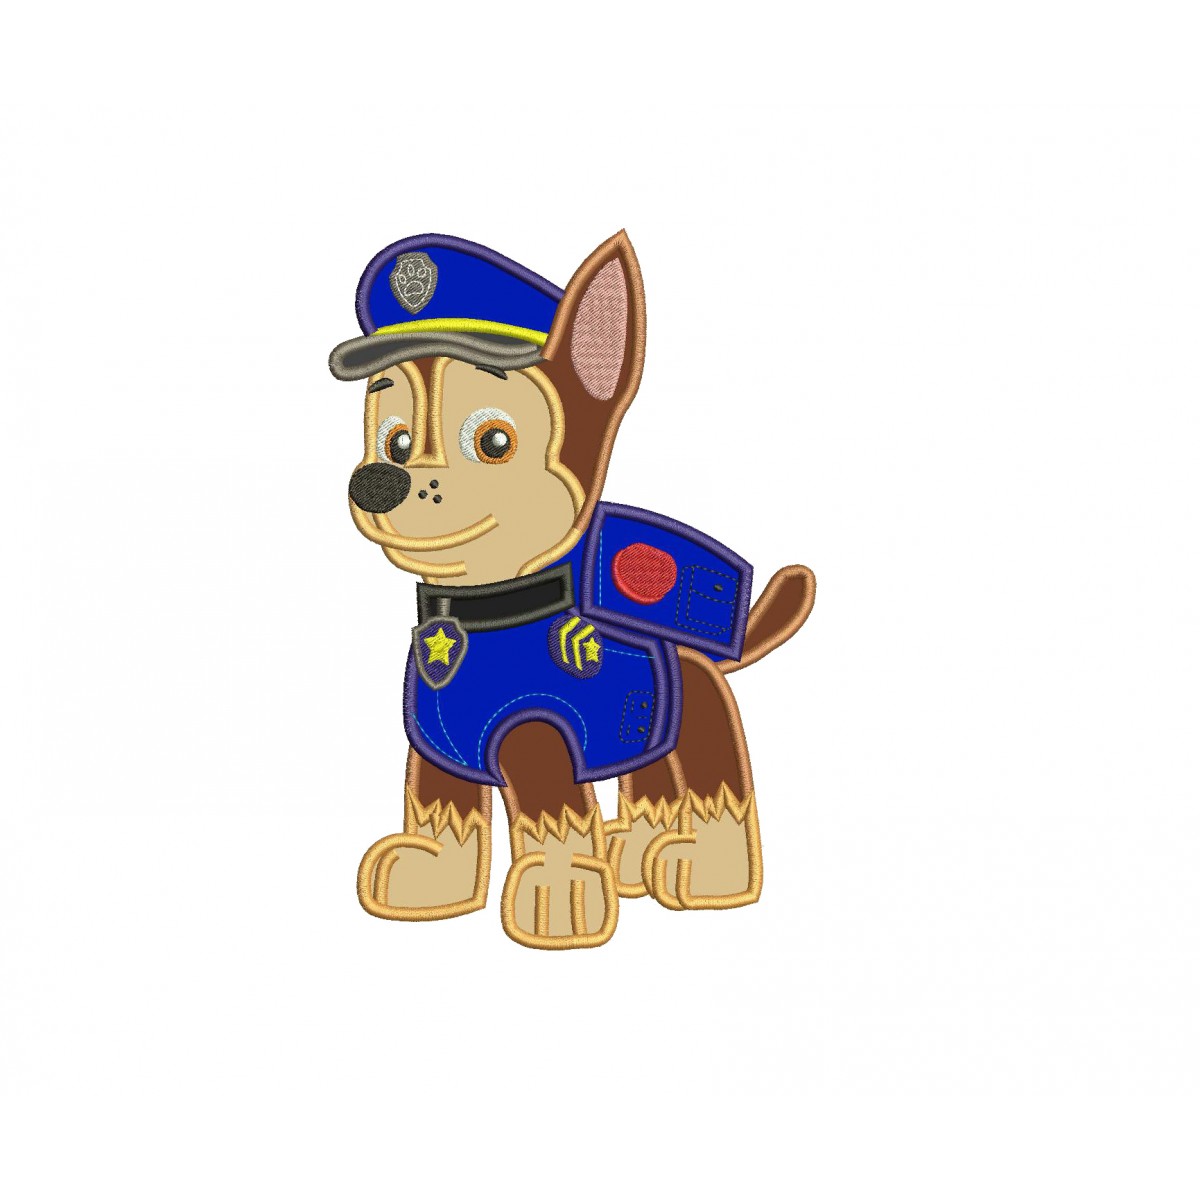 Chase Paw Patrol Applique